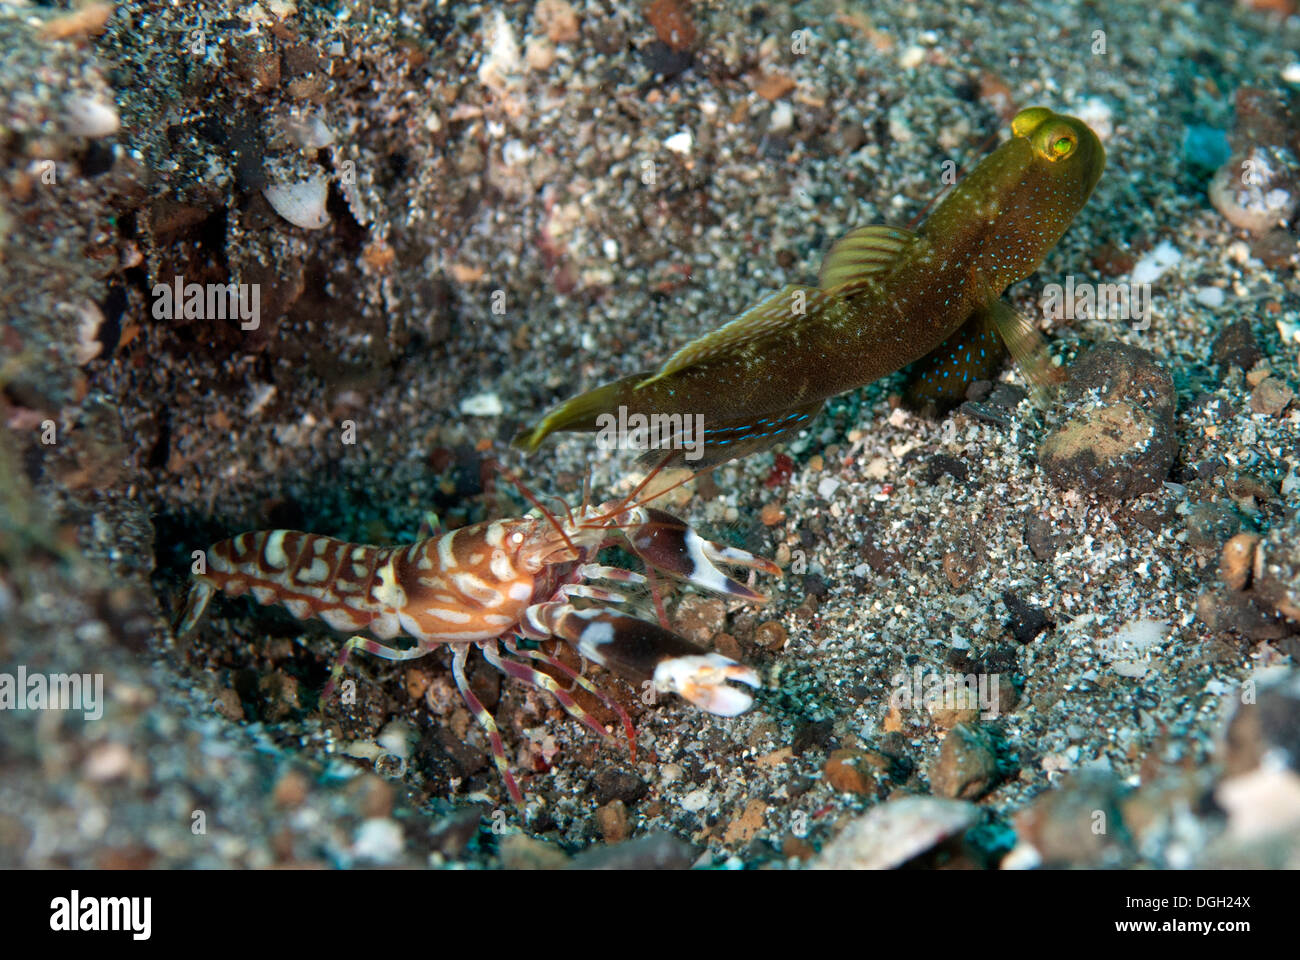 Variable Shrimpgoby (Cryptocentrus fasciatus) adult with Snapping Shrimp (Alpheus sp.) at burrow entrance in sand Lembeh Stock Photo